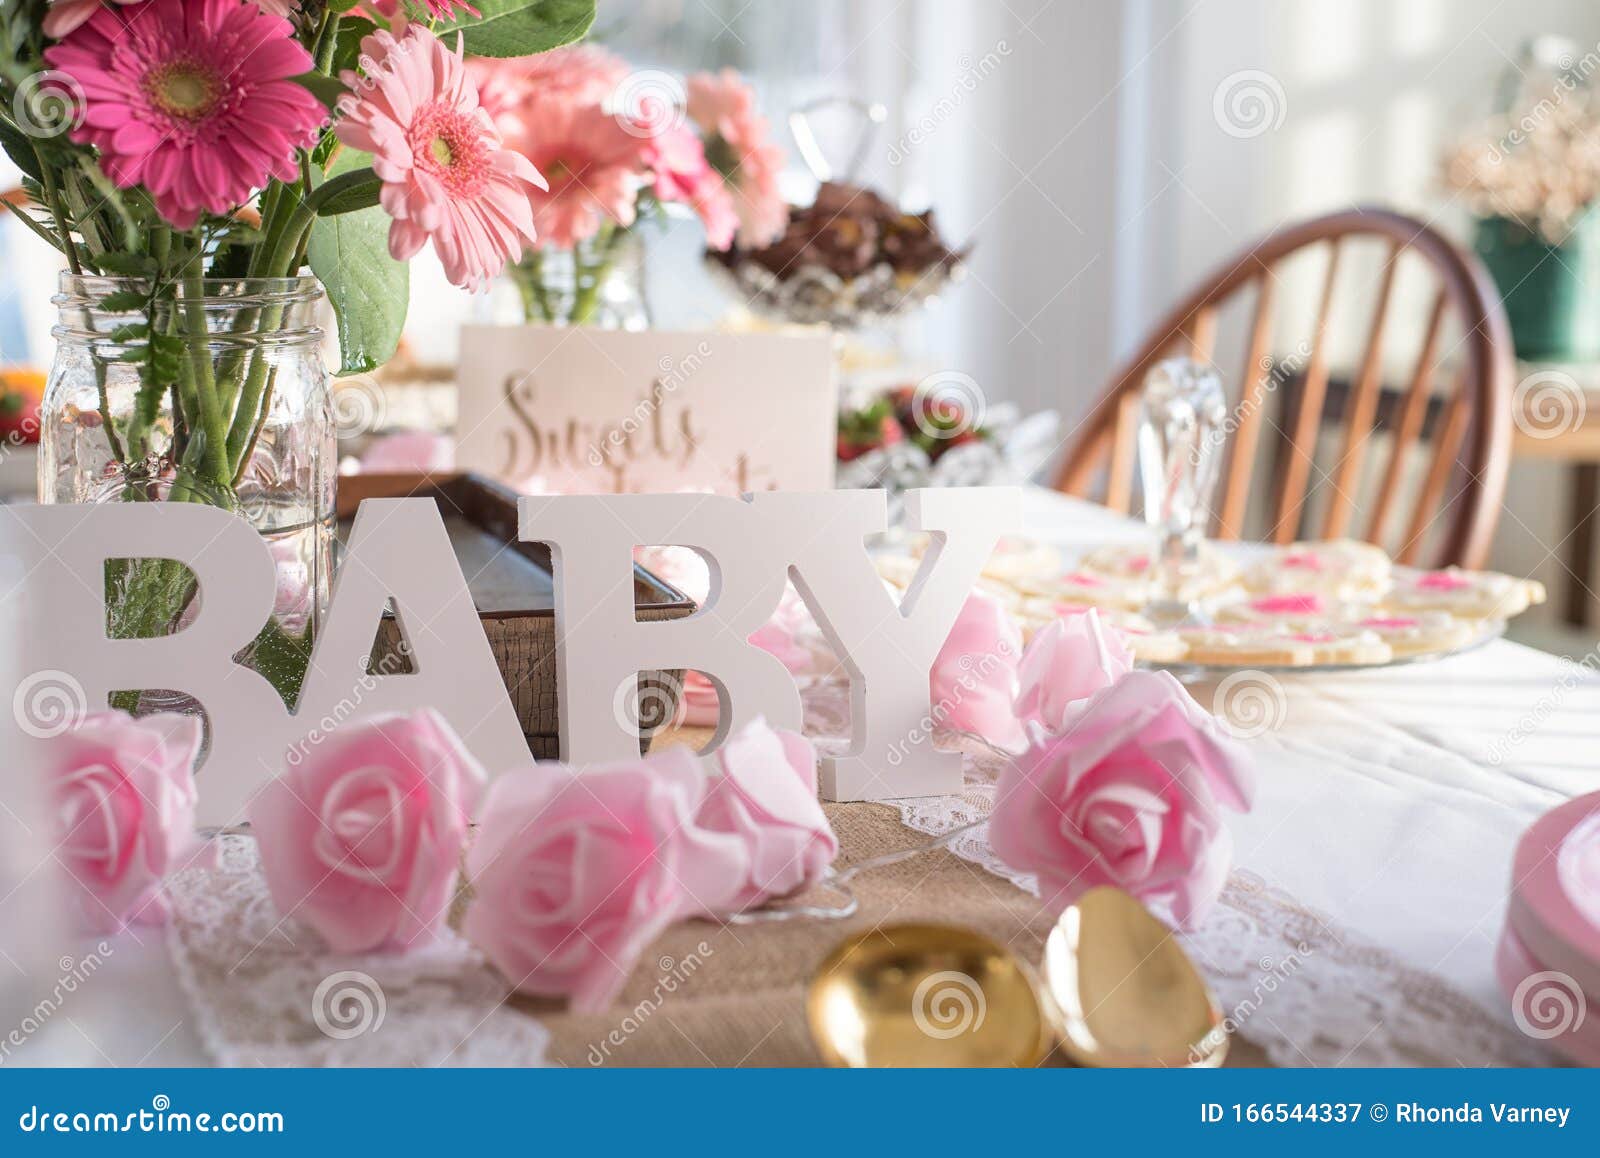 Shabby Chic Pink Baby Shower Decorations On Table Stock Image Image Of Love